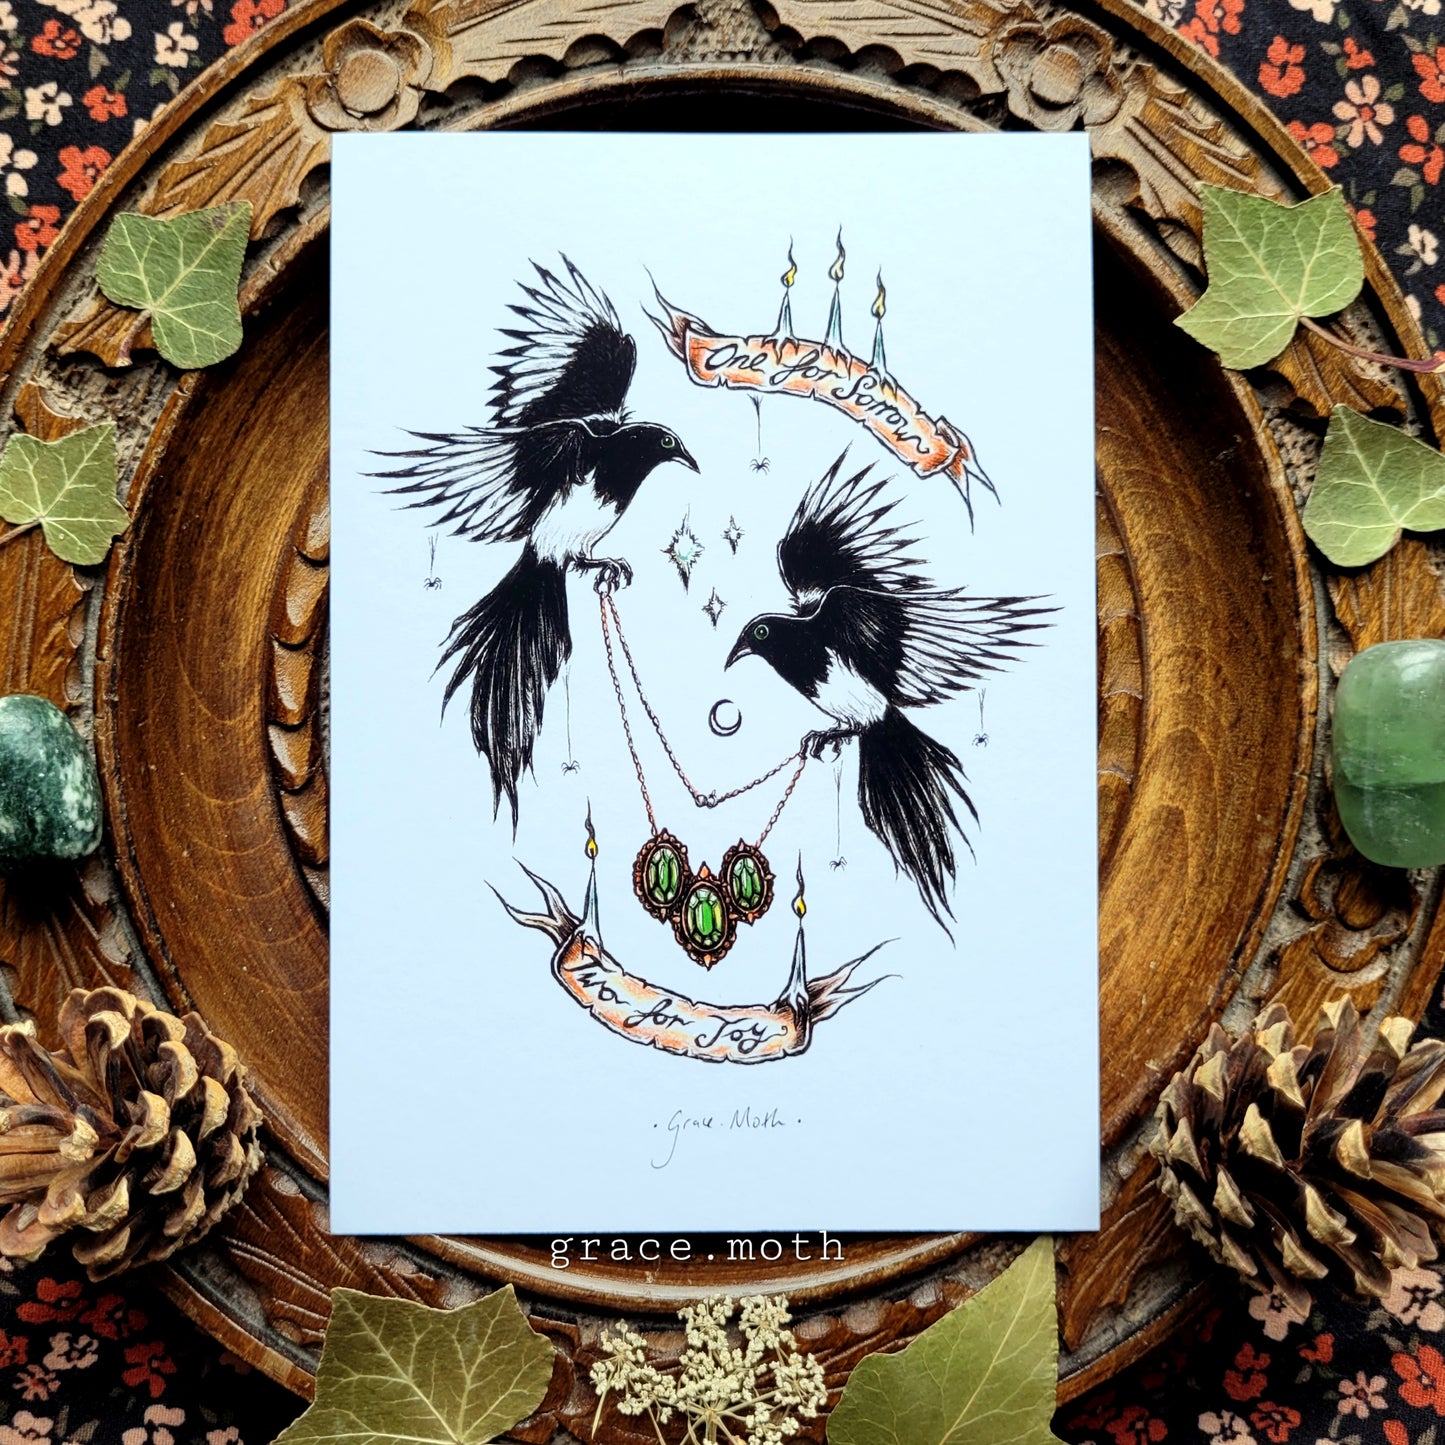 Two Magpies - A6 print by Grace Moth - 5.8 x 4.1 - Cottagecore - Gothic - Witchy